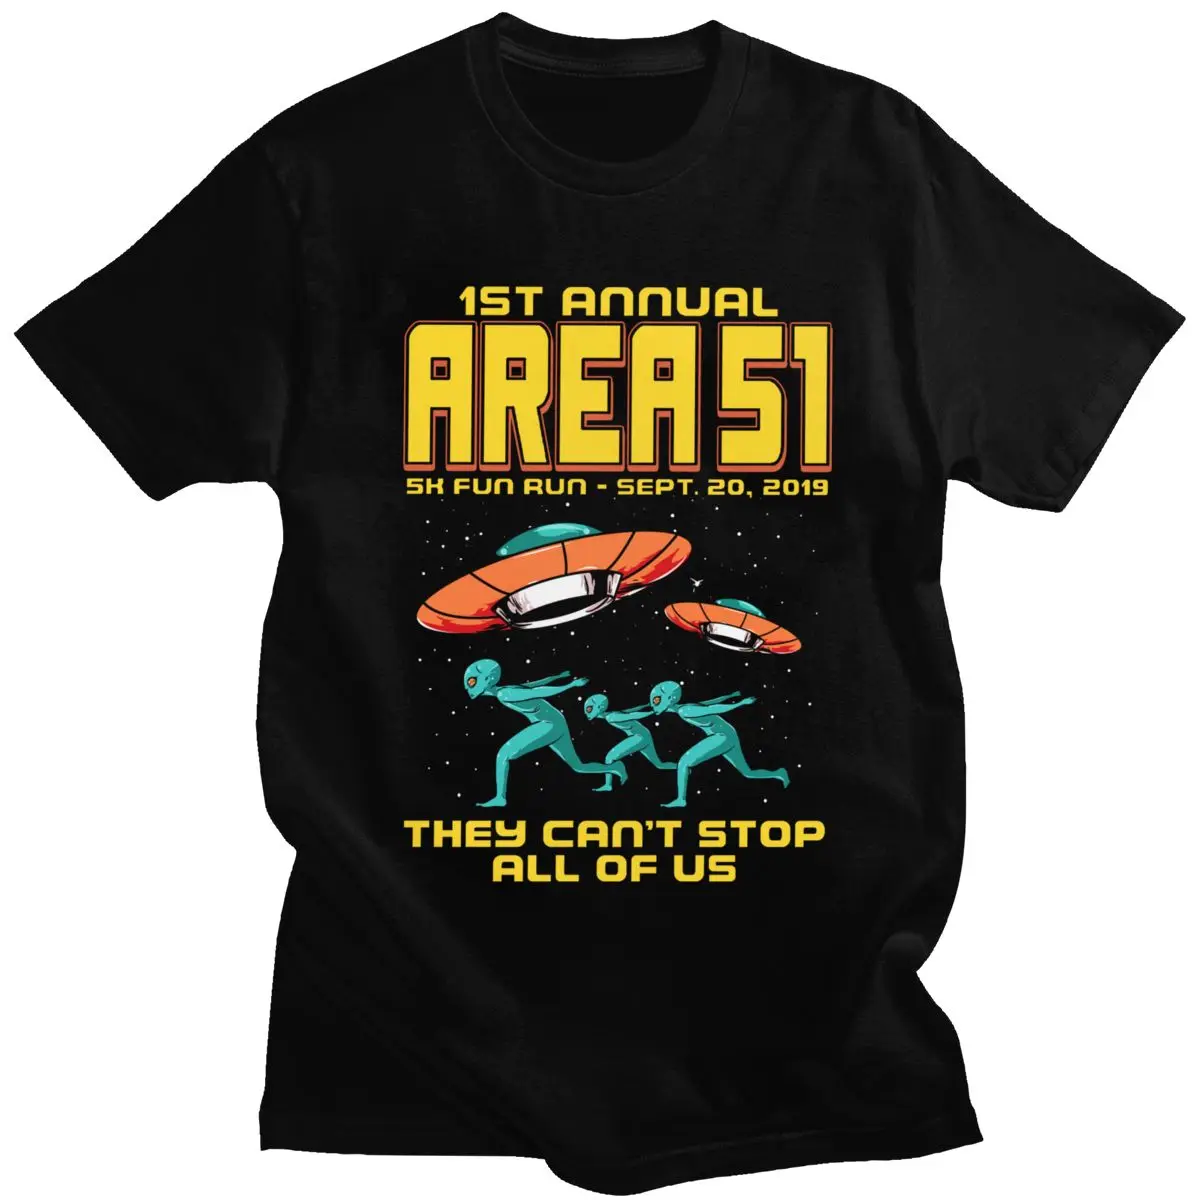 

Men 5K Fun Run They Can't Stop All of Us T Shirt Storm Area 51 Alien Ufo Space Ship Saucer Clothes Vintage Tees Summer T-Shirt